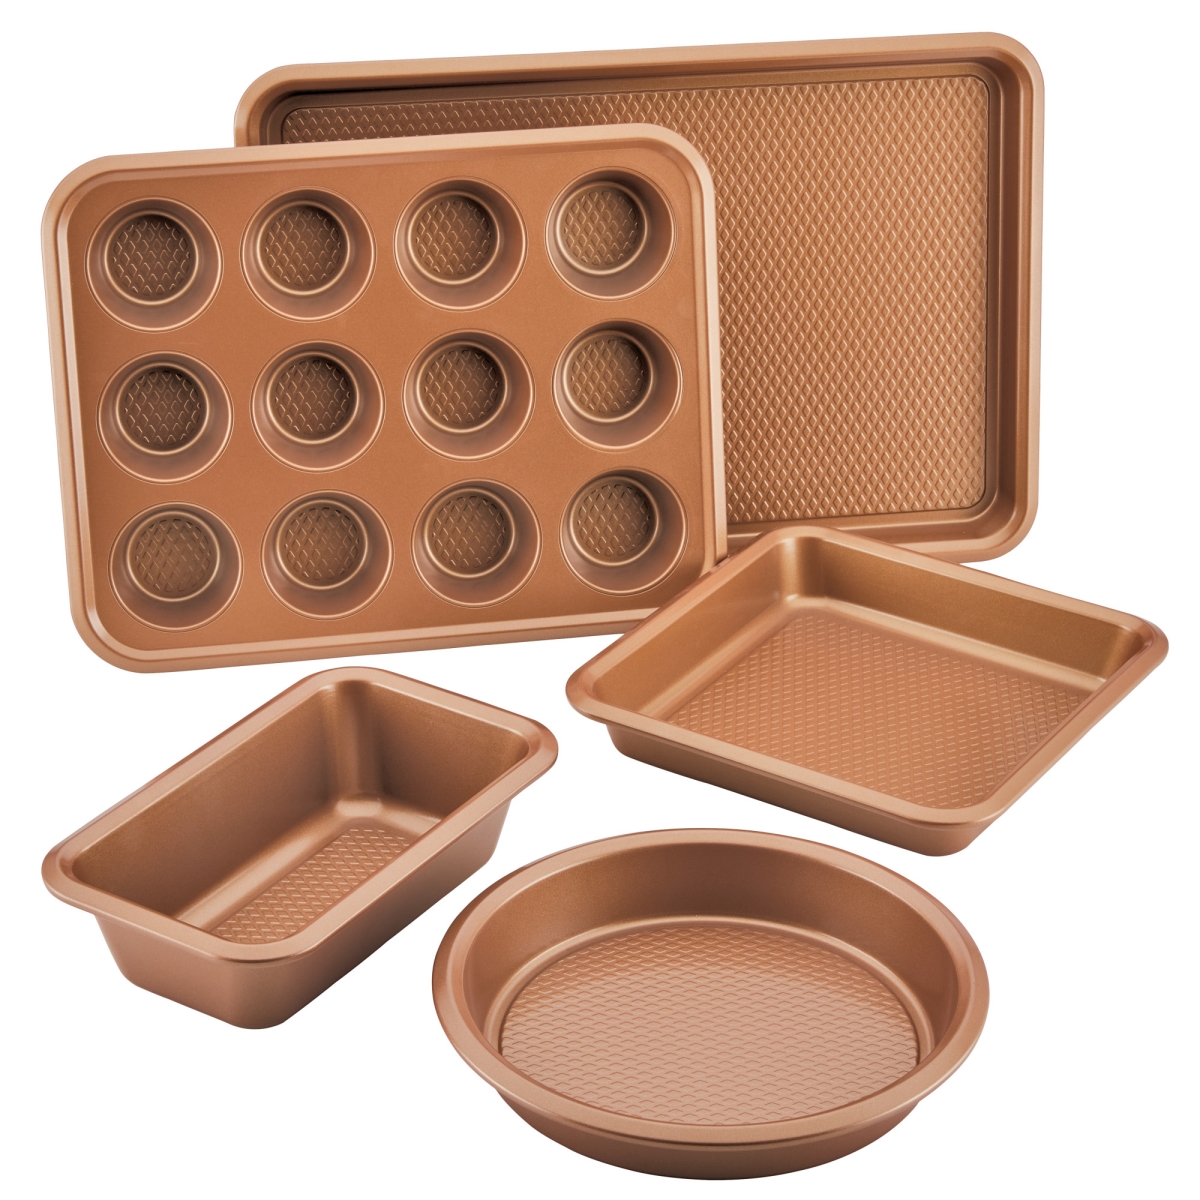 Picture of Ayesha Curry 48518 Bakeware Nonstick Bakeware Set, Copper - 5 Piece